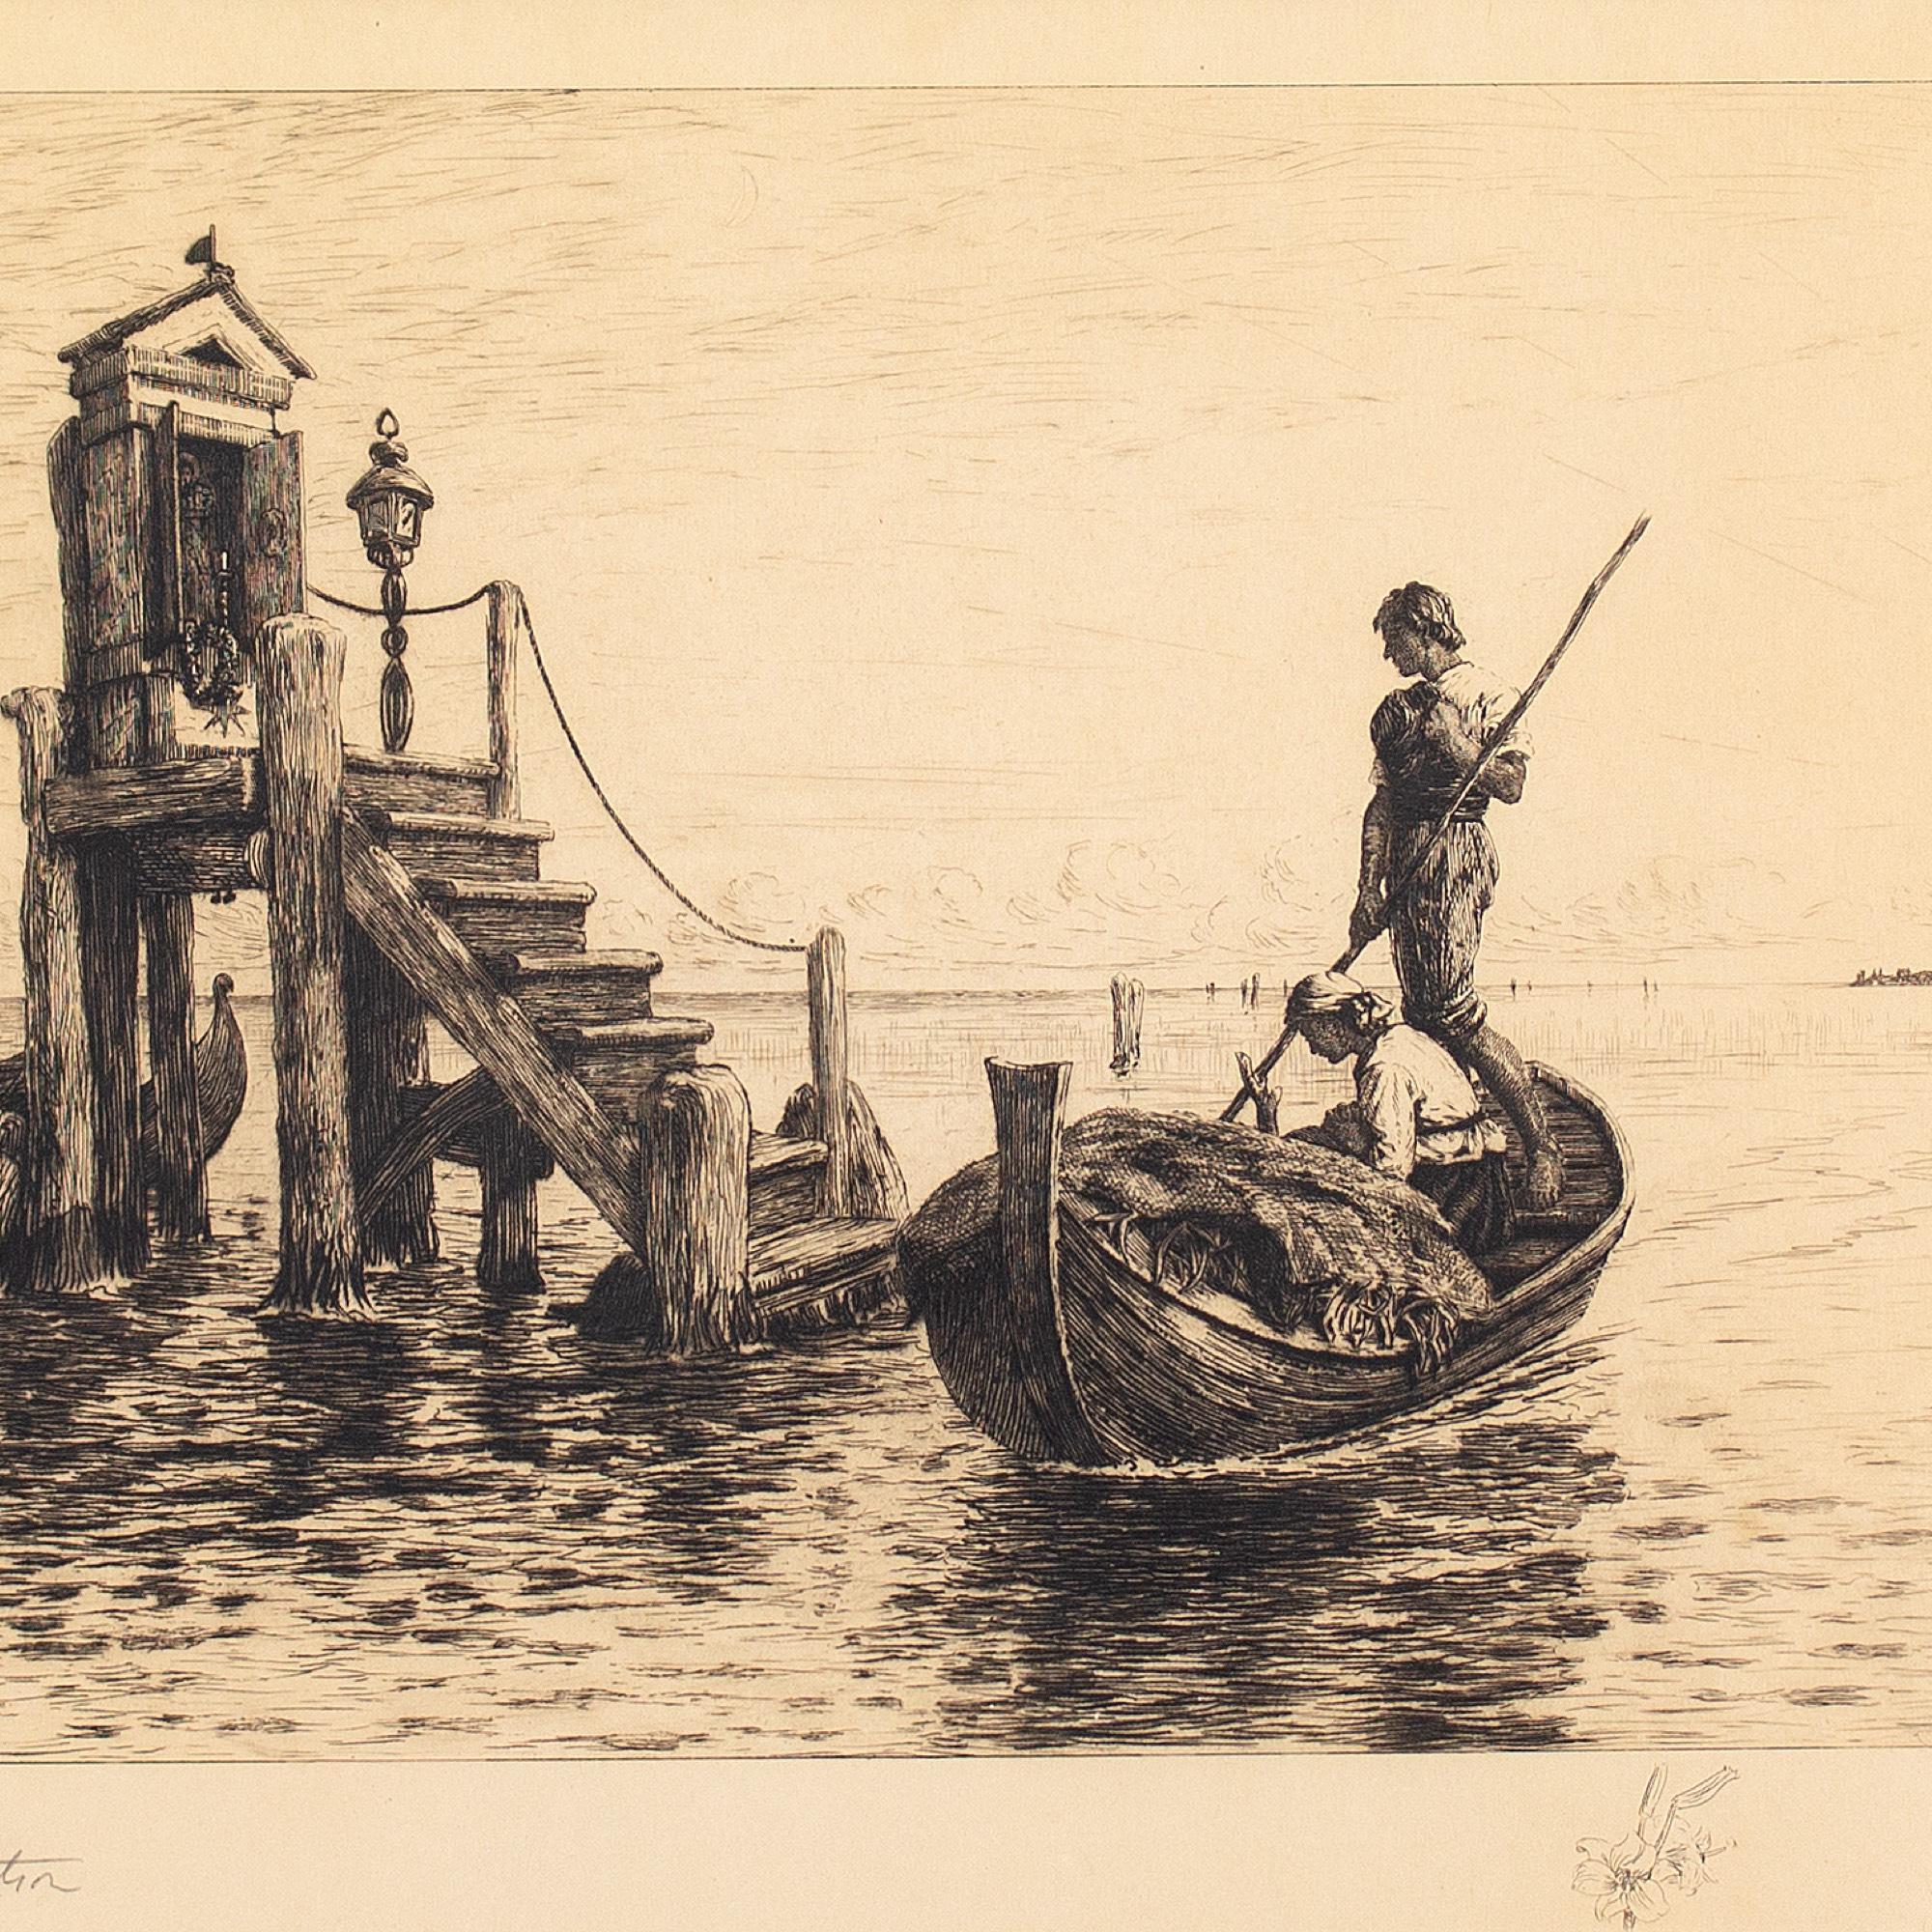 This fine late 19th-century etching by British artist Henry Robert Robertson (1839-1921) depicts a couple worshipping a shrine to the Virgin Mary at sea. The original painting was exhibited at the Royal Academy in 1879.

The couple sailed to this